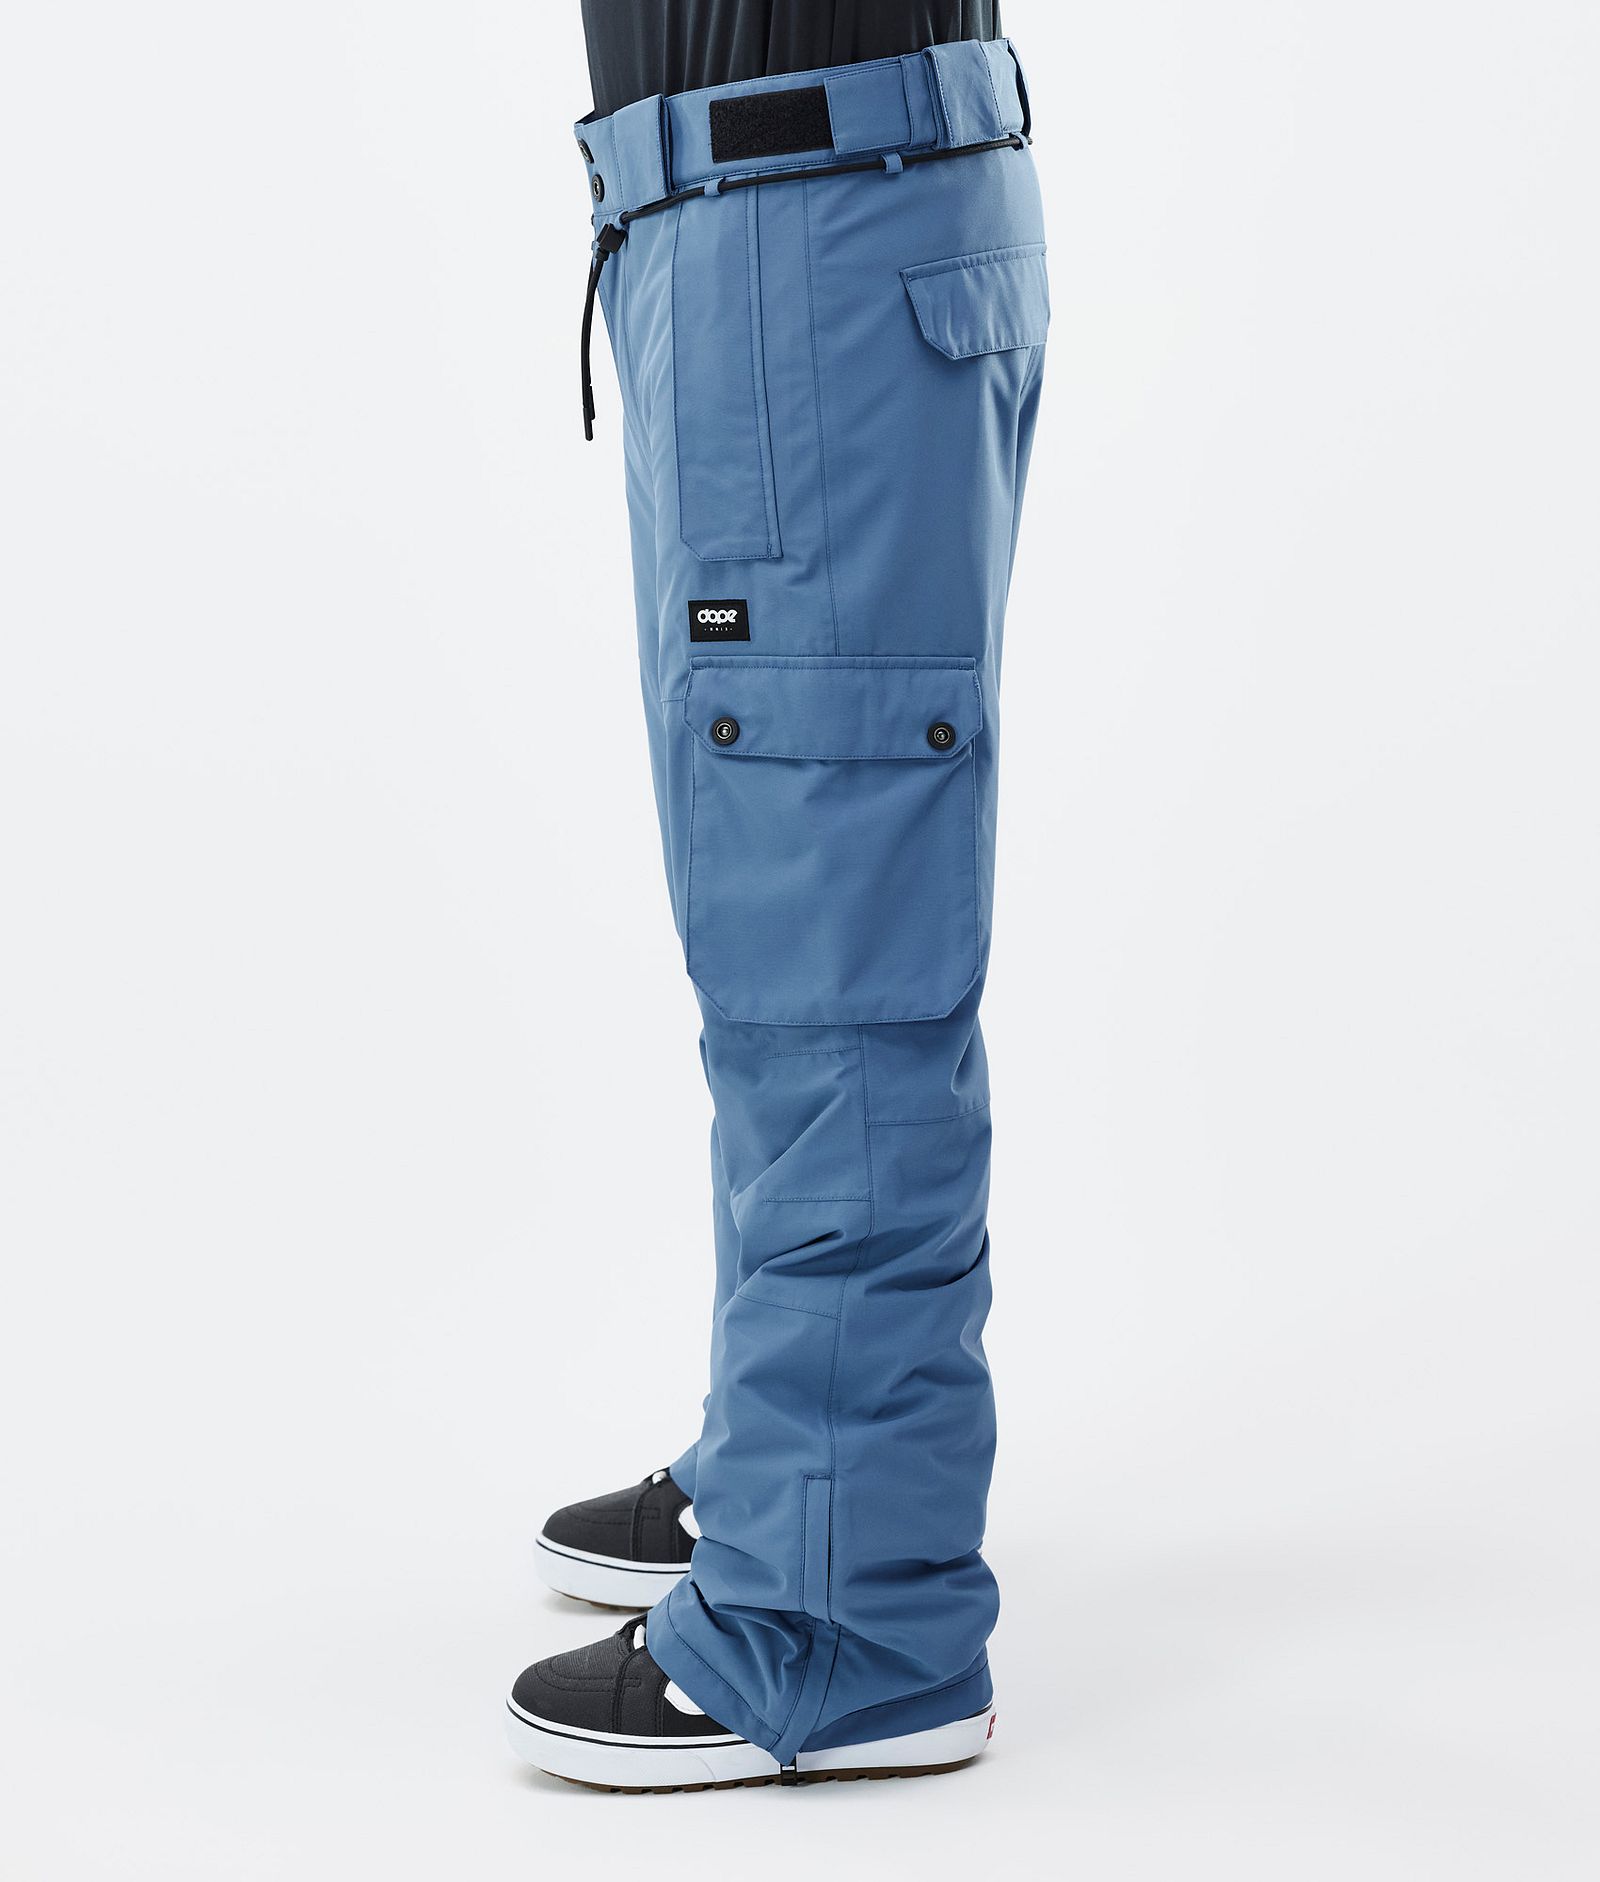 Dope Iconic Pantalones Snowboard Hombre Blue Steel